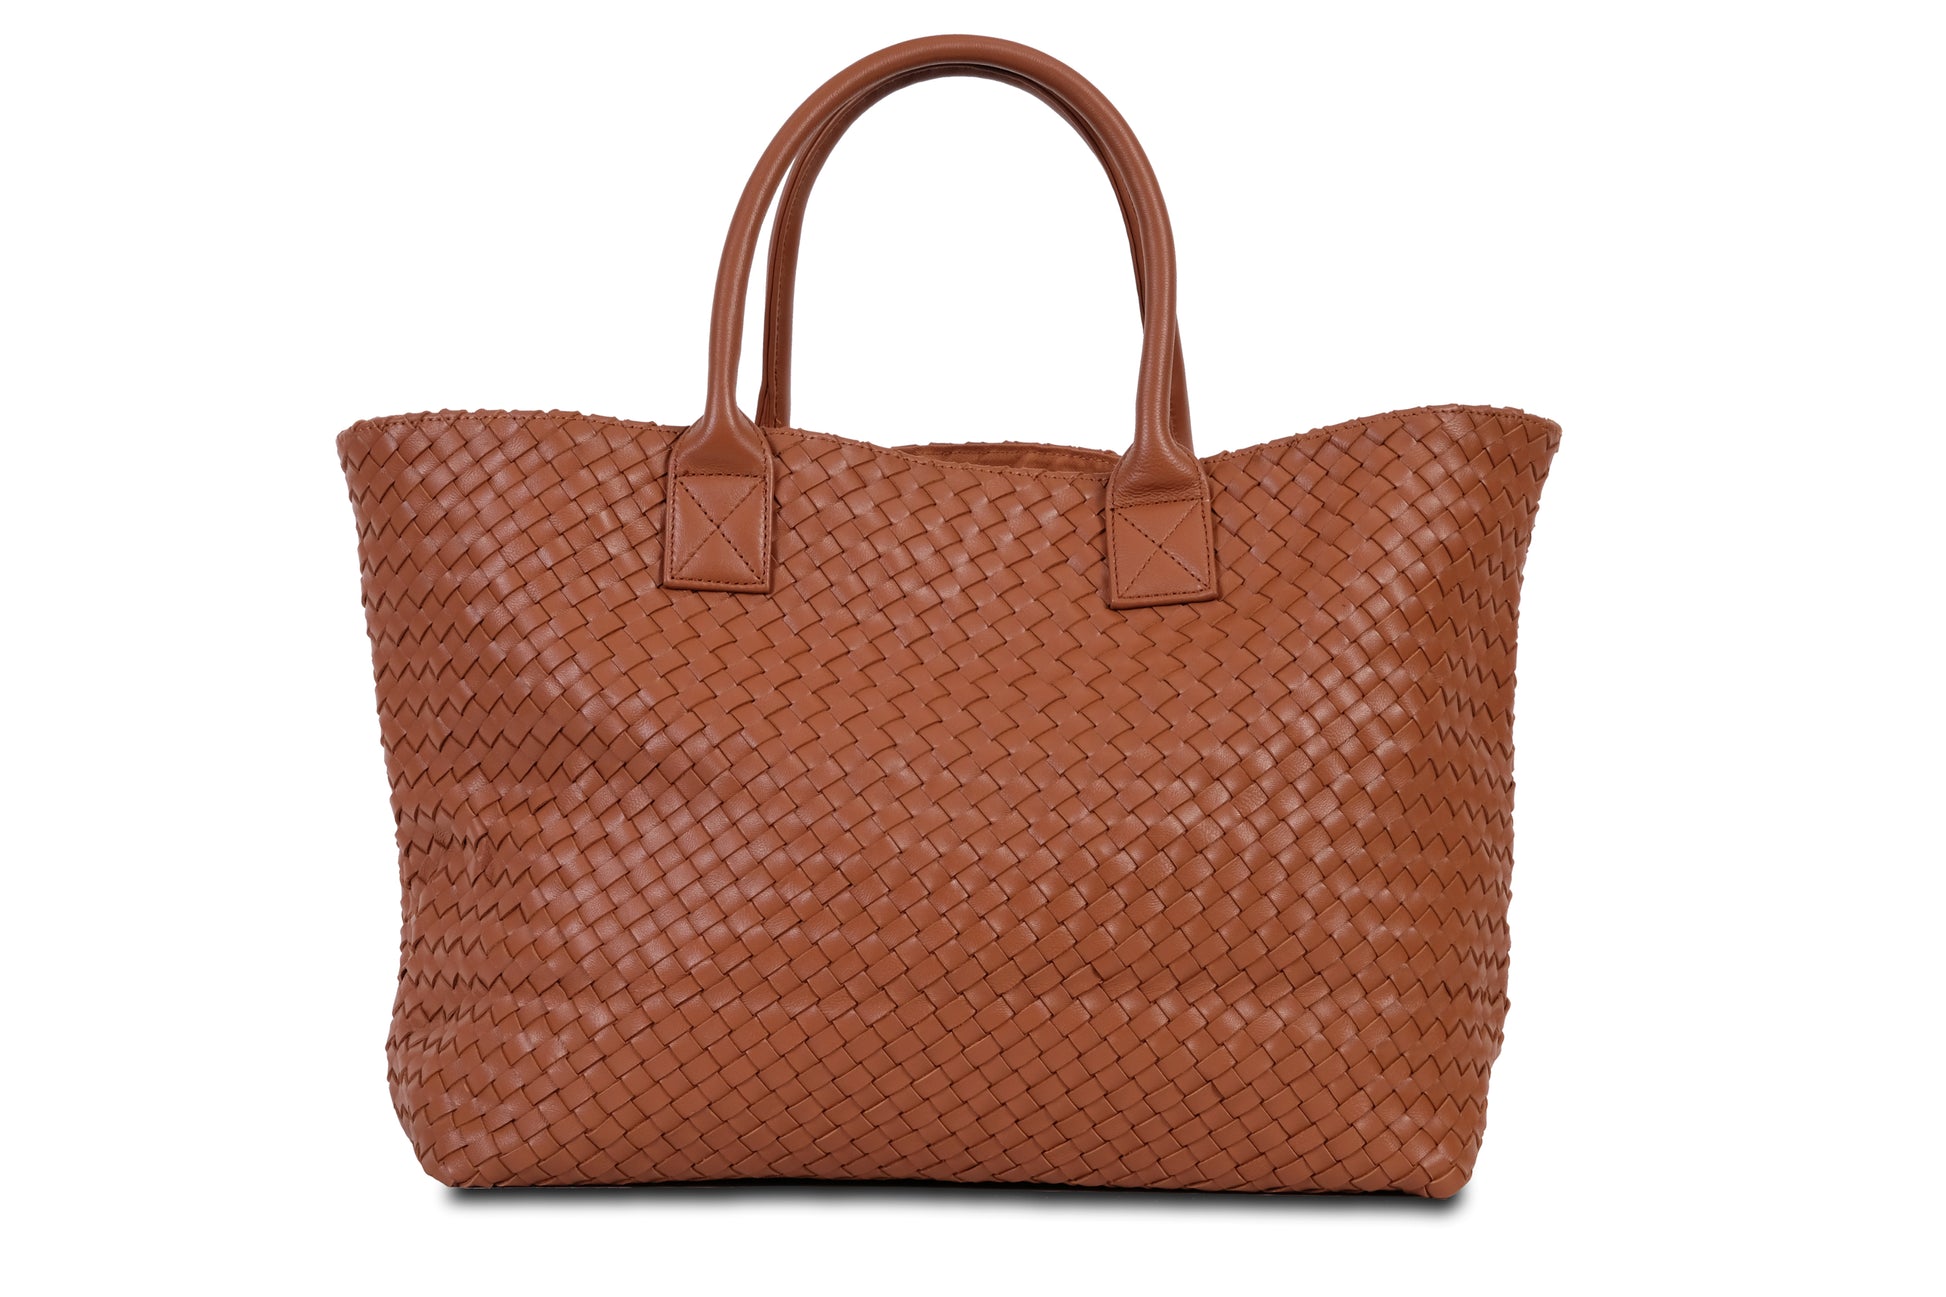 Destarina Coffee Brown Crosshatch Leather Tote Bag Handbag made by Dewi Maya back view available at the best boutique in Upstate South Carolina Spartanburg Greenville Dewi Maya Boutique